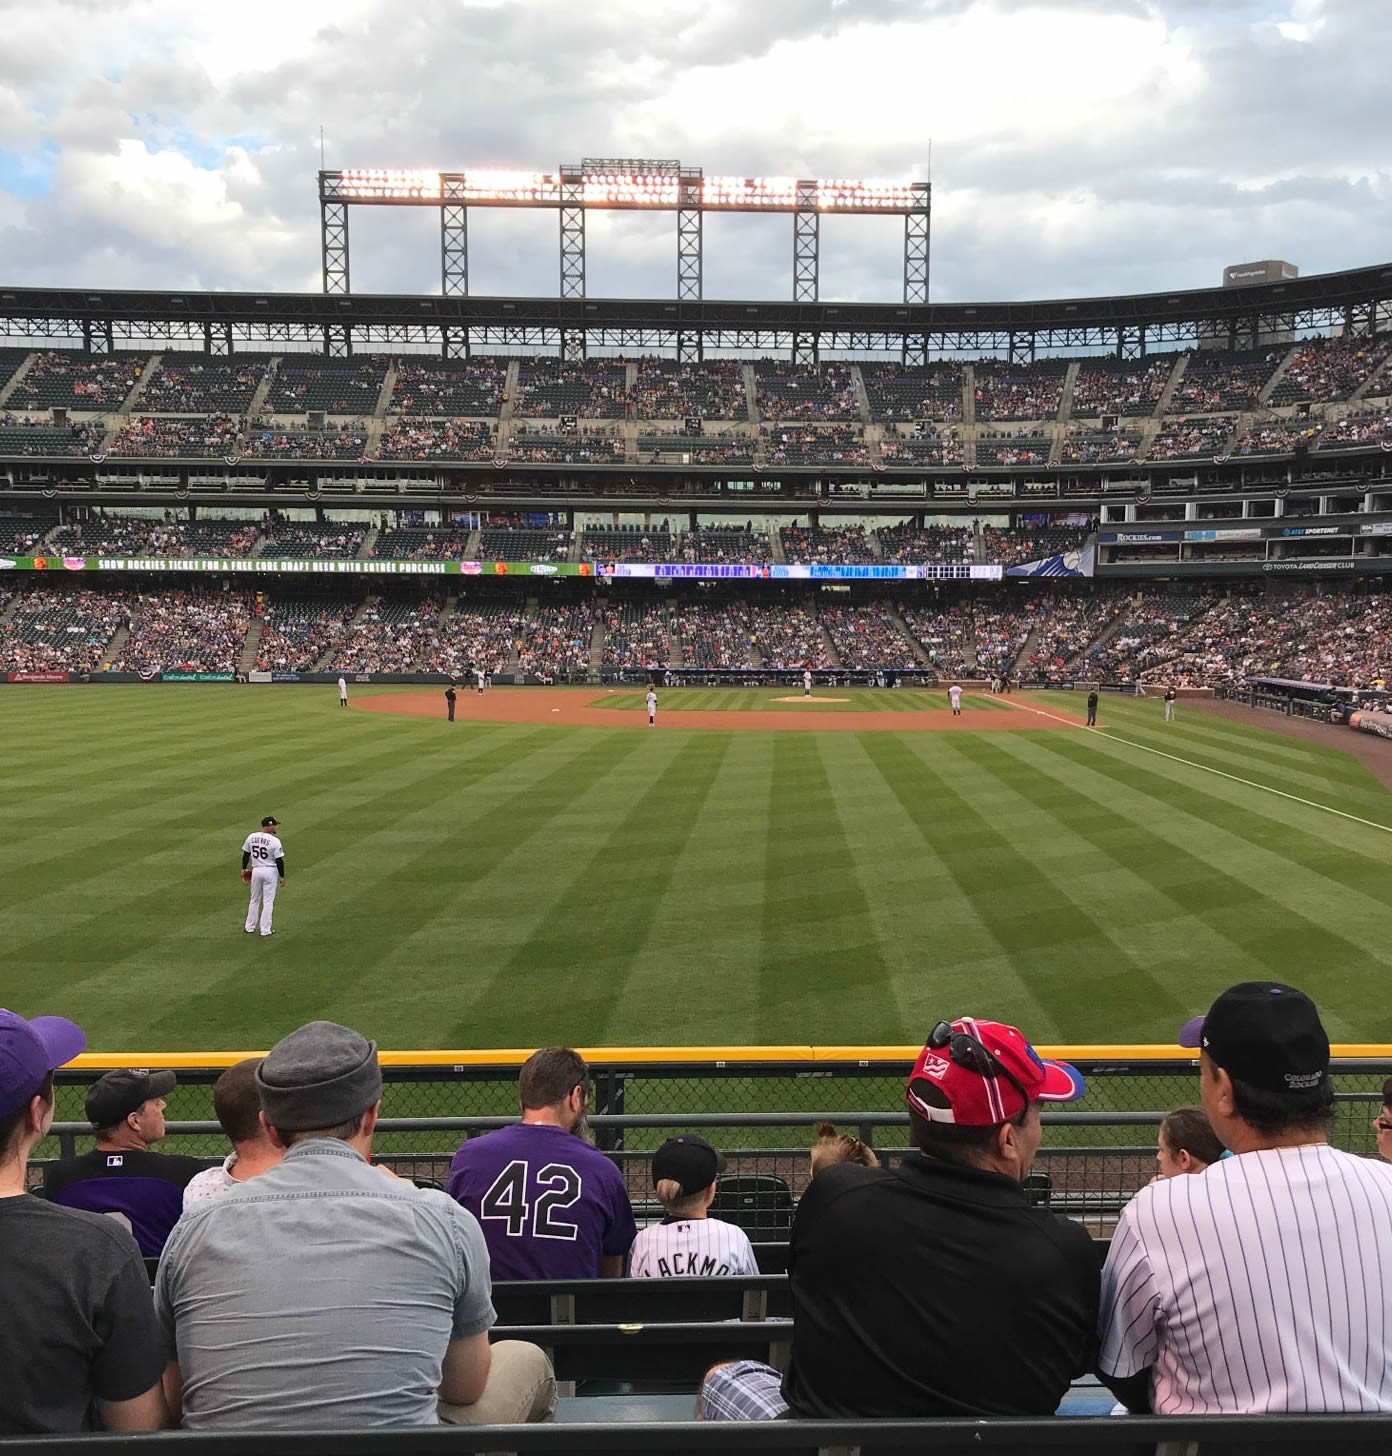 section 152, row 7 seat view  - coors field